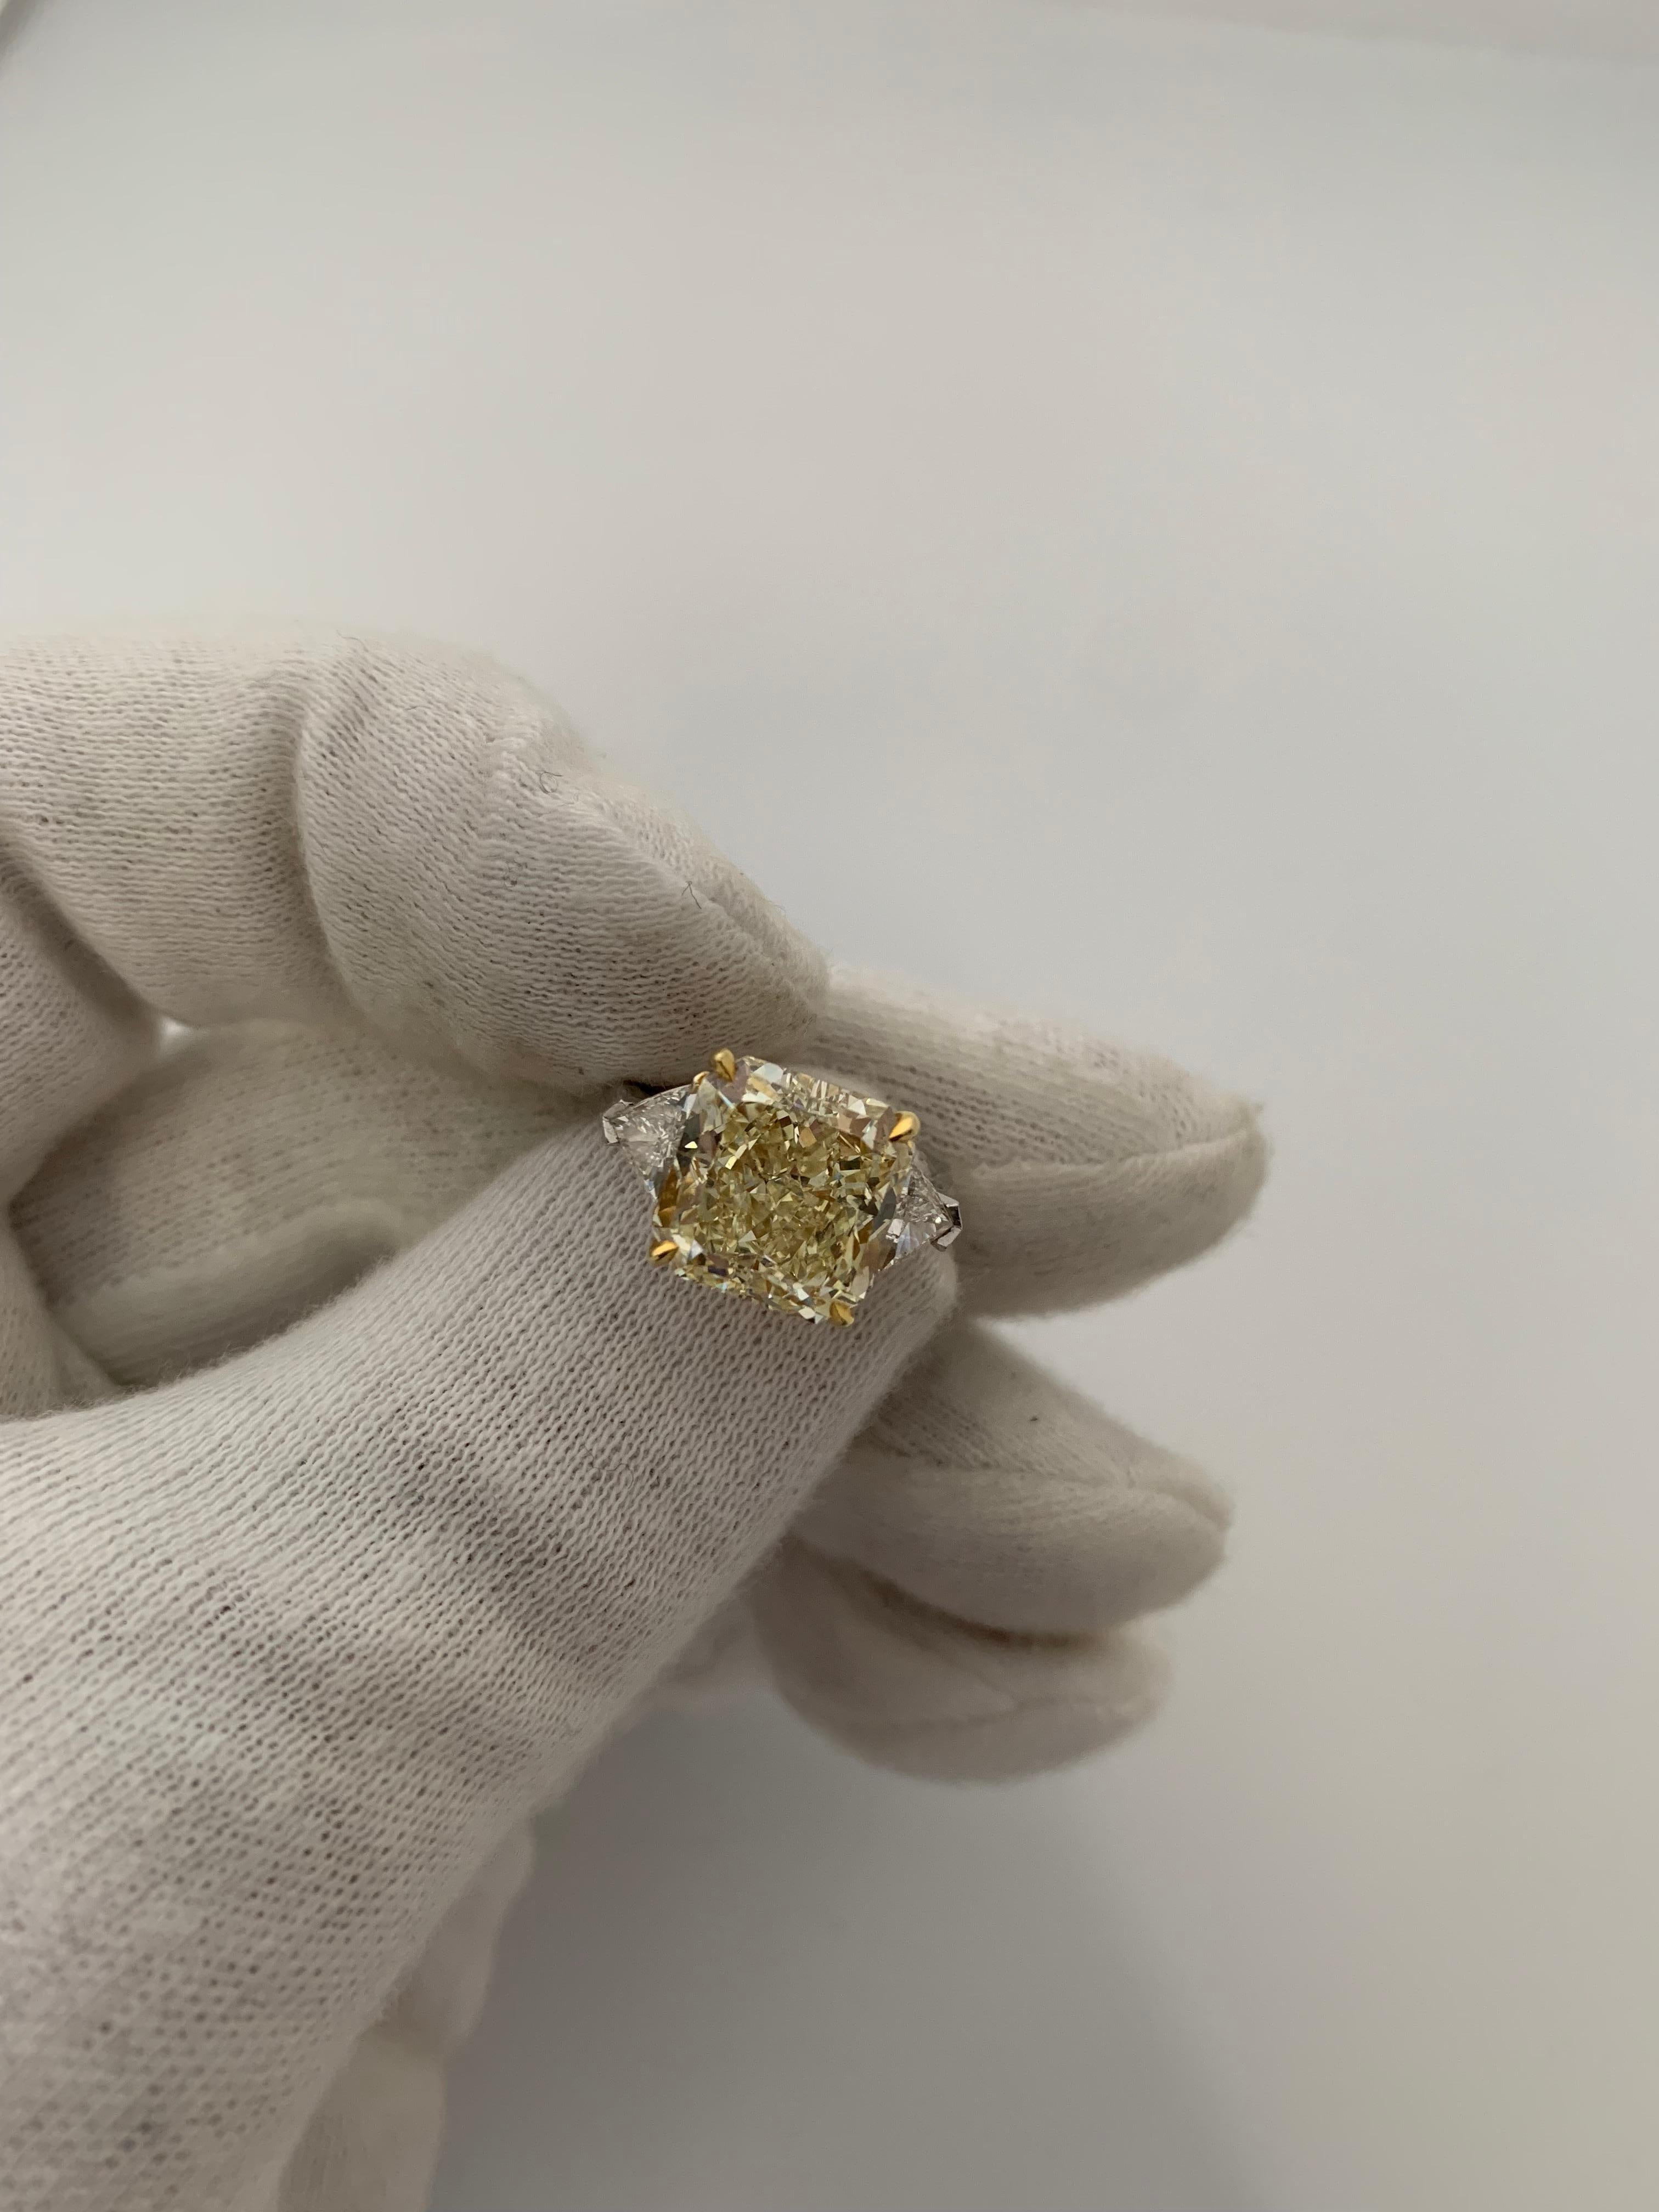 Centered upon a beautiful Fancy Light Yellow Diamond with a VS1 Clarity. Square and Bold Radiant Cut flanked by 2 Triangle Diamonds weighing 0.82 Carats.
Set in Platinum and 18 Karat Yellow Gold.